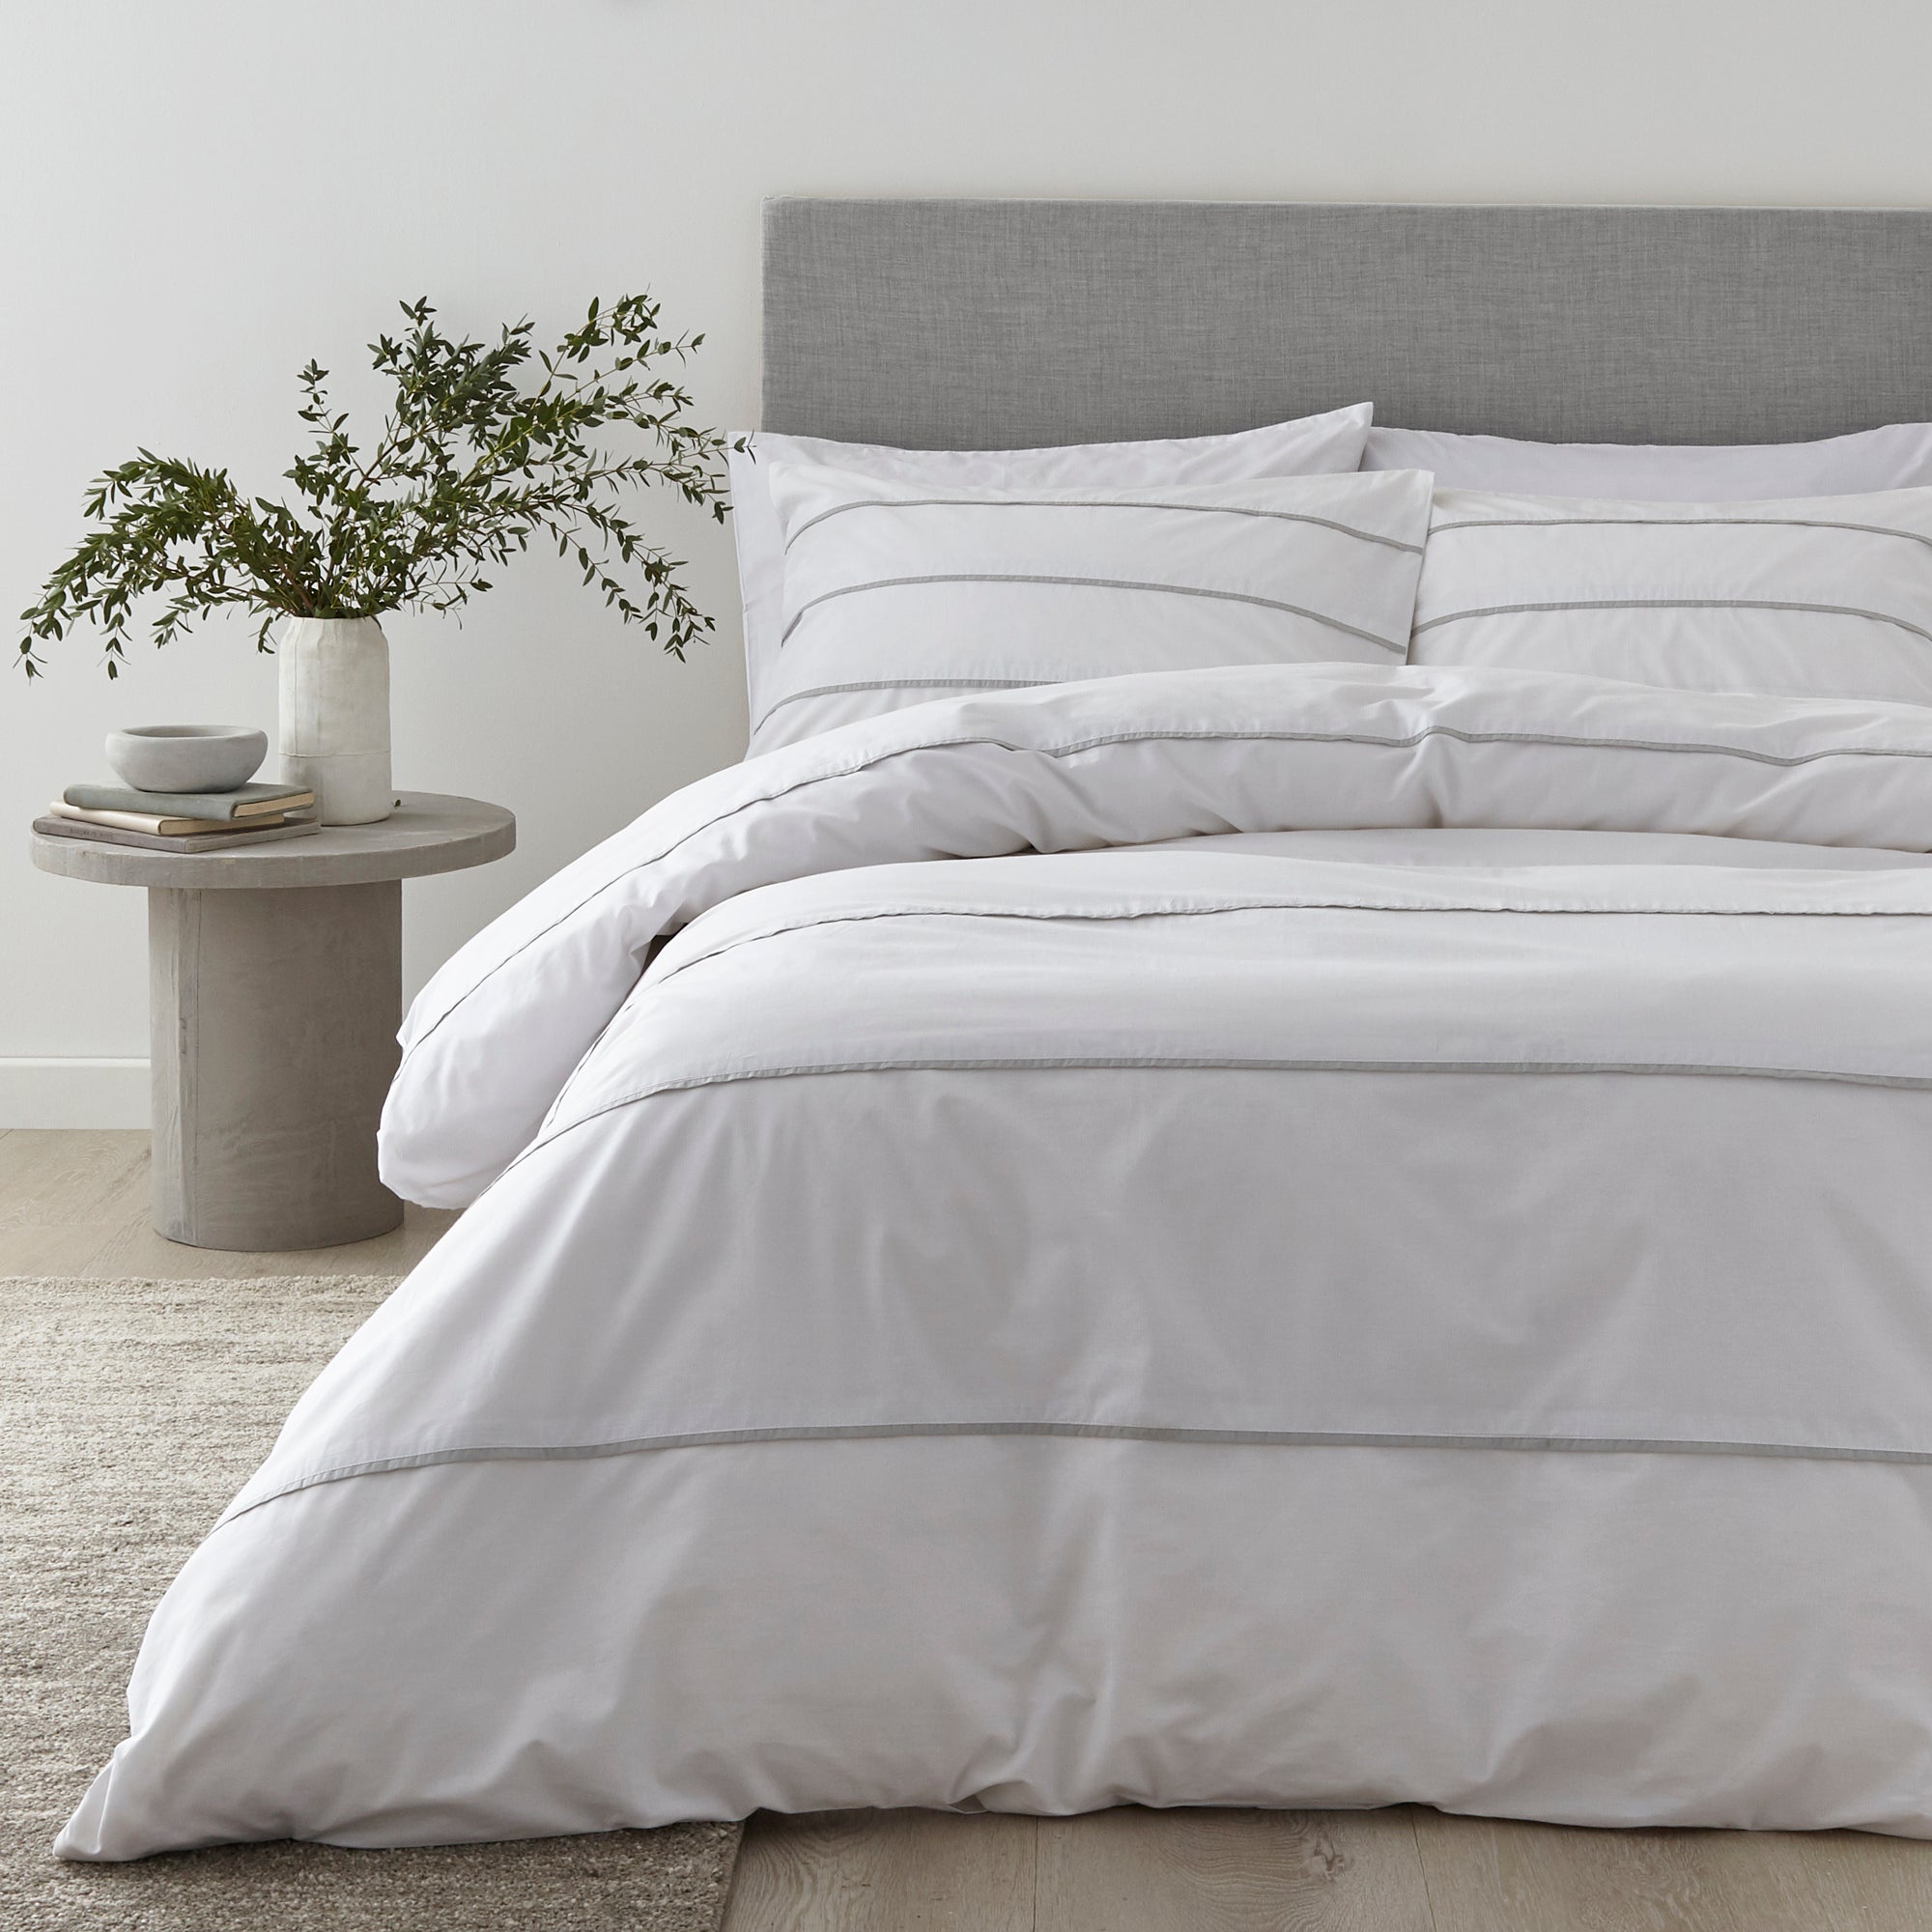 Content By Terence Conran Halstead Pleats White and Grey Striped 100 Cotton Duvet Cover and Pillowcase Set Grey